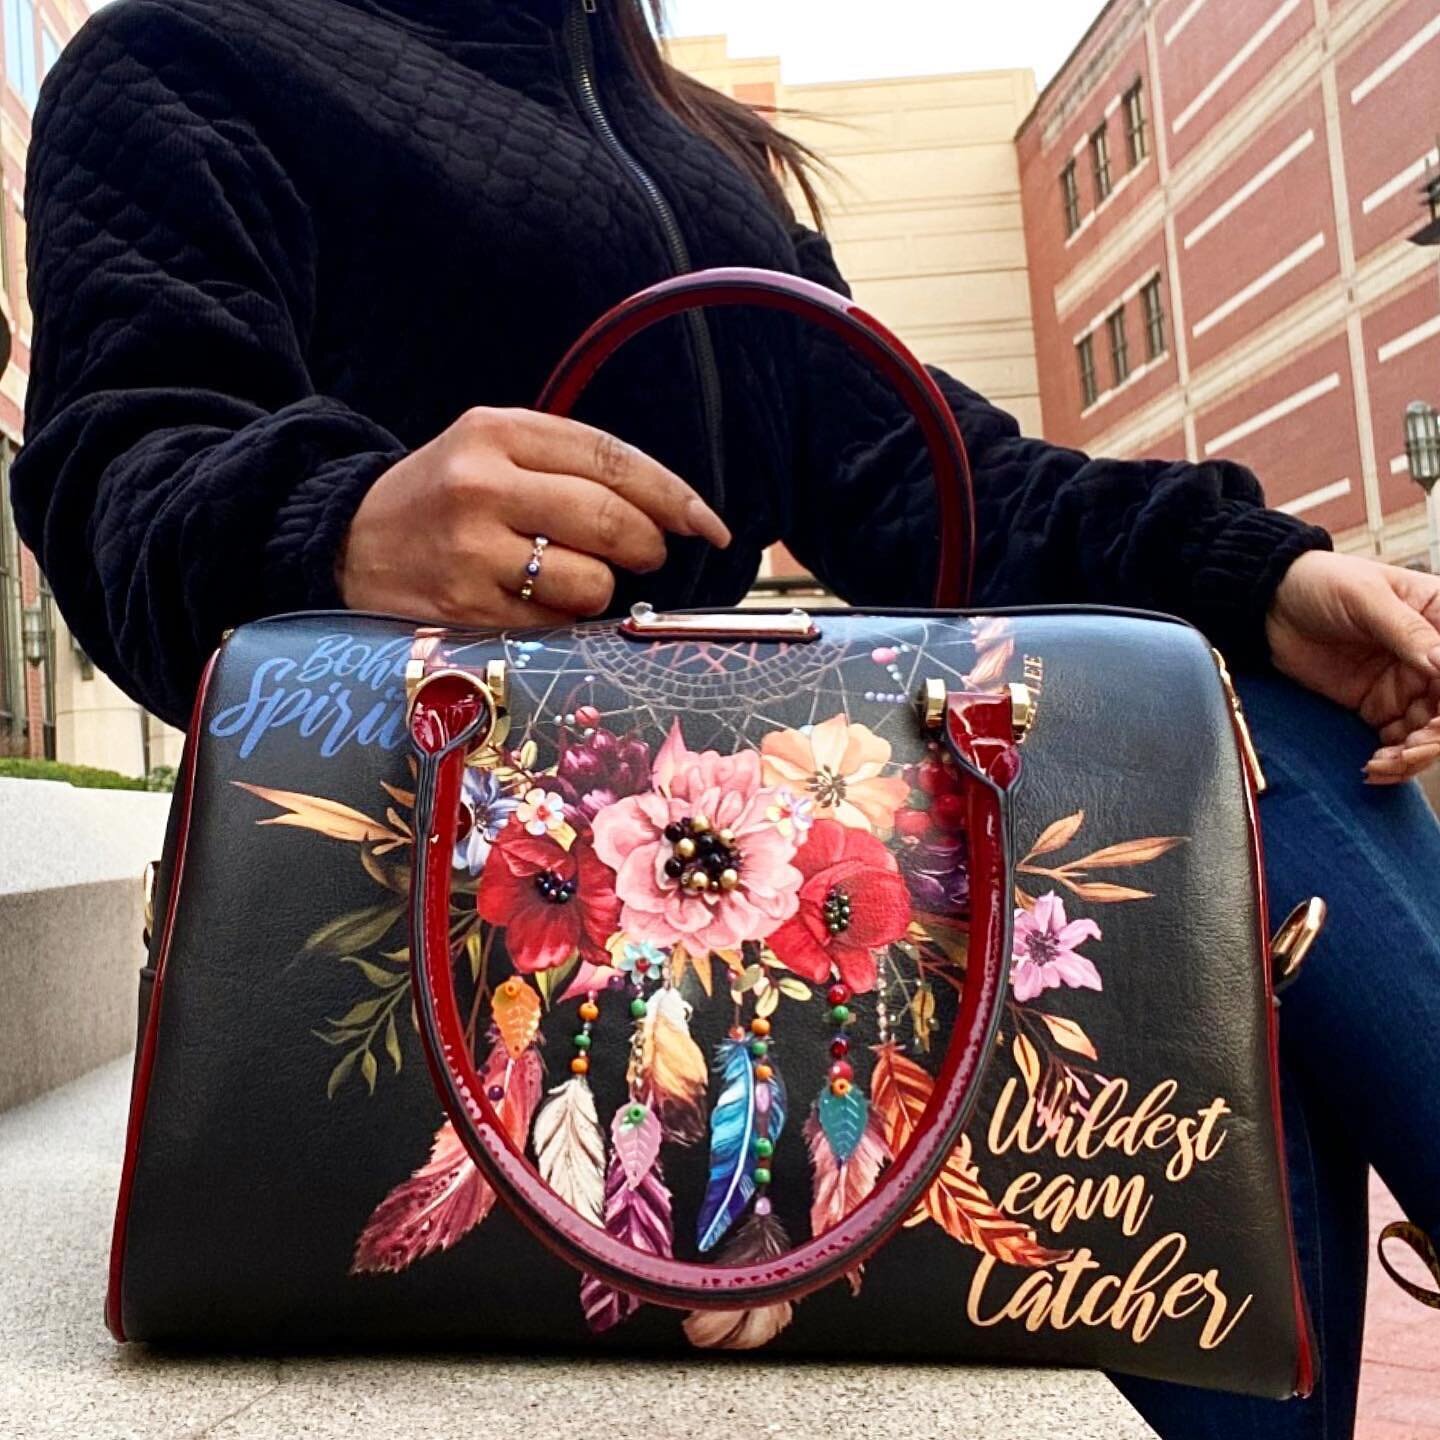 Be your beautiful self with the stylish &ldquo;Bohemian Black&rdquo; print handbag that will take all the looks!👜💕🥰 👜 Tap the picture to see prices or visit the link in our official website to shop our new arrivals!

📸 credit: @karlithabeauty 

